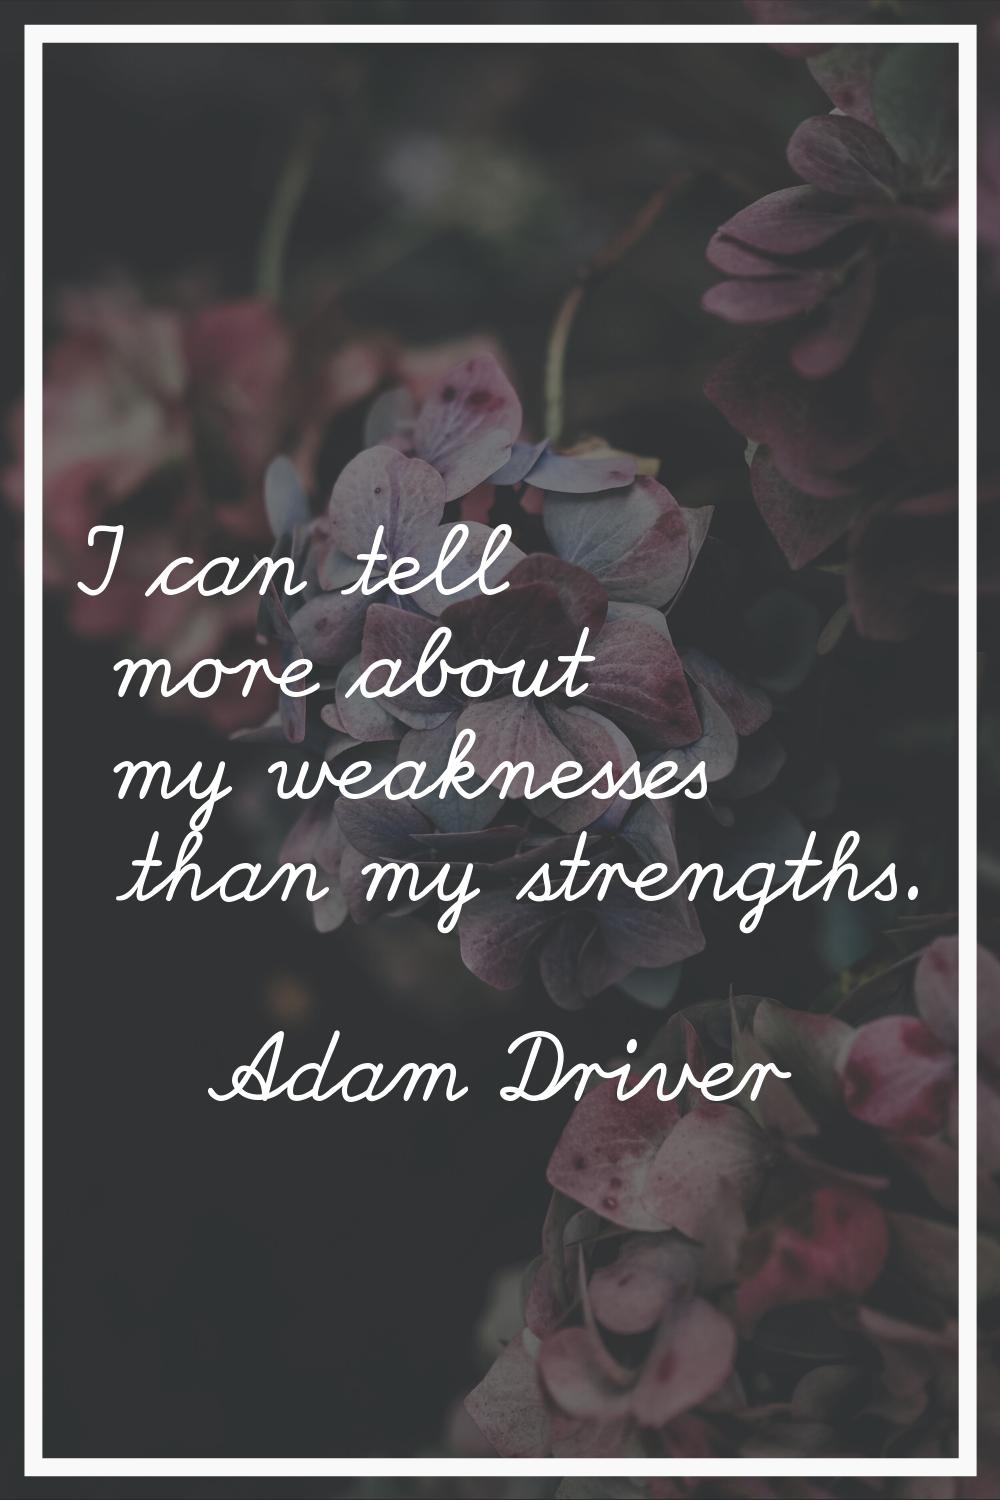 I can tell more about my weaknesses than my strengths.